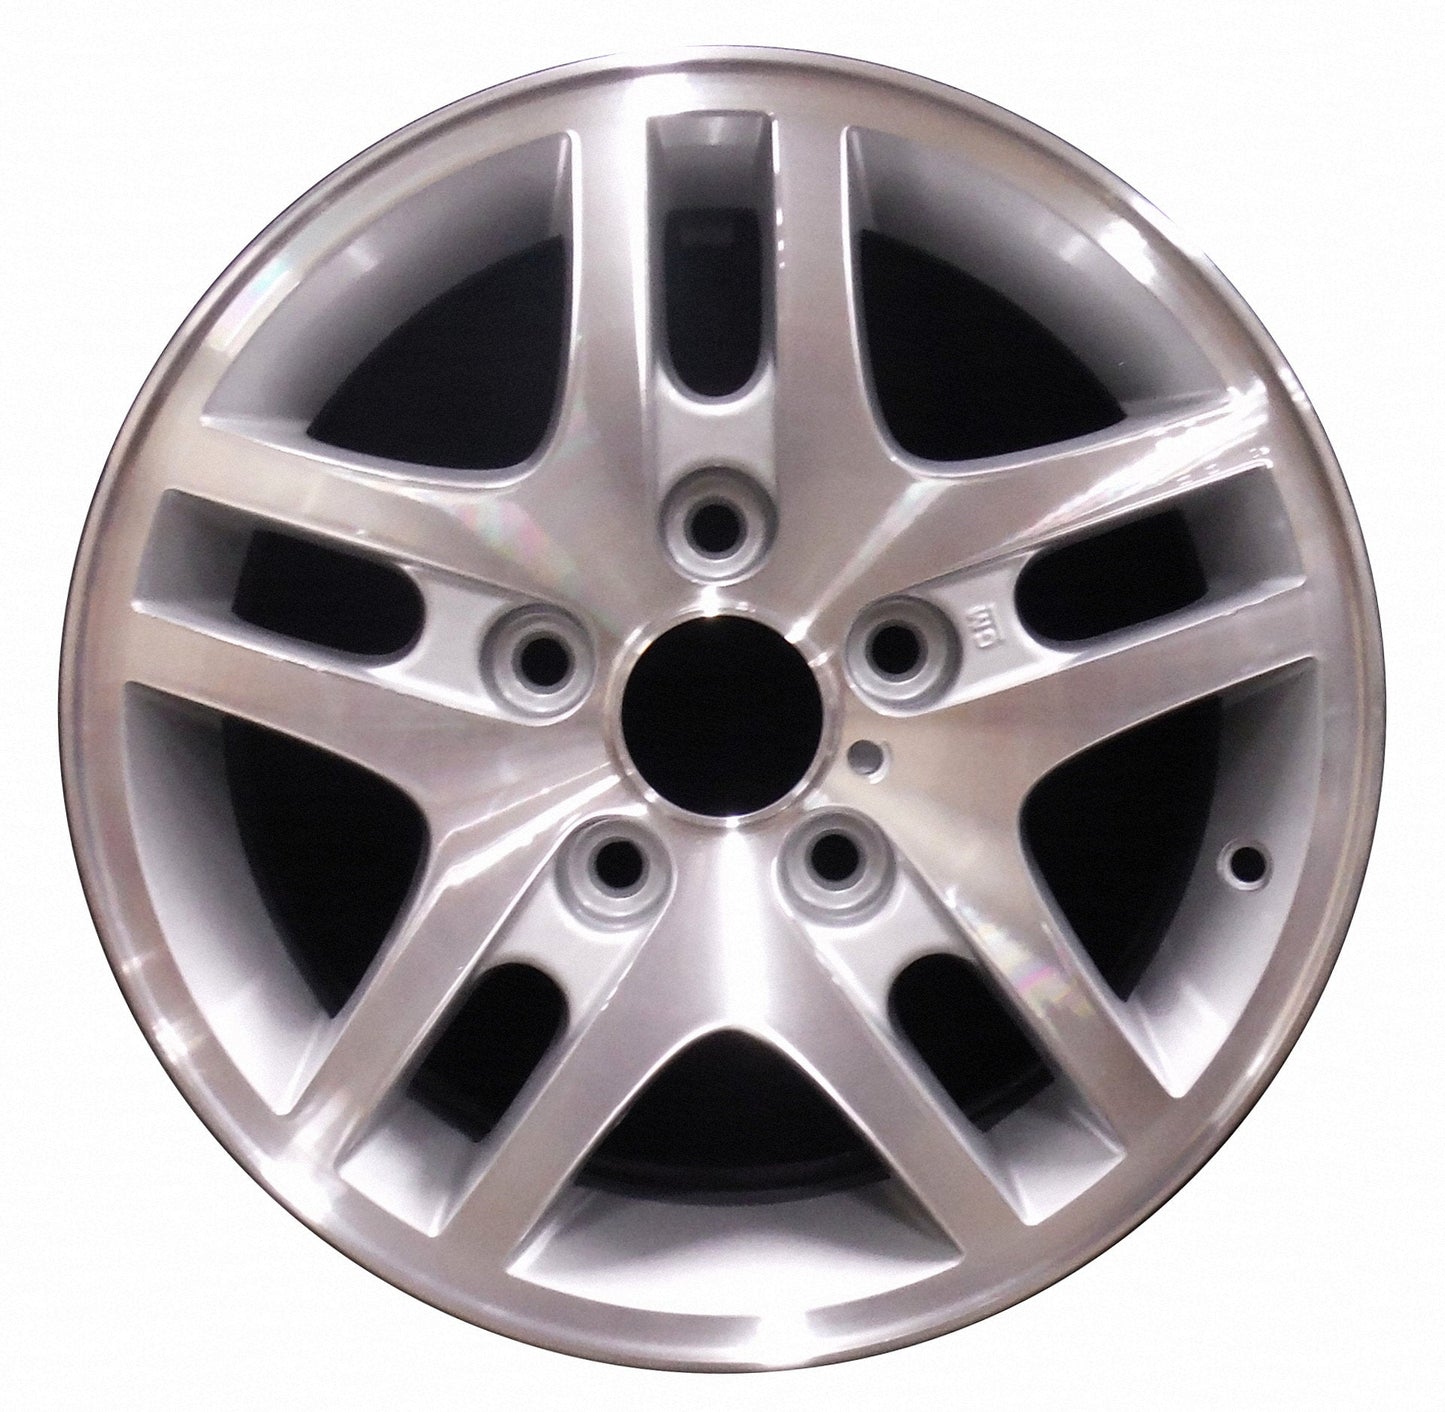 Chevrolet S10 Truck  2002, 2003, 2004 Factory OEM Car Wheel Size 15x7 Alloy WAO.5157.PS01.MA